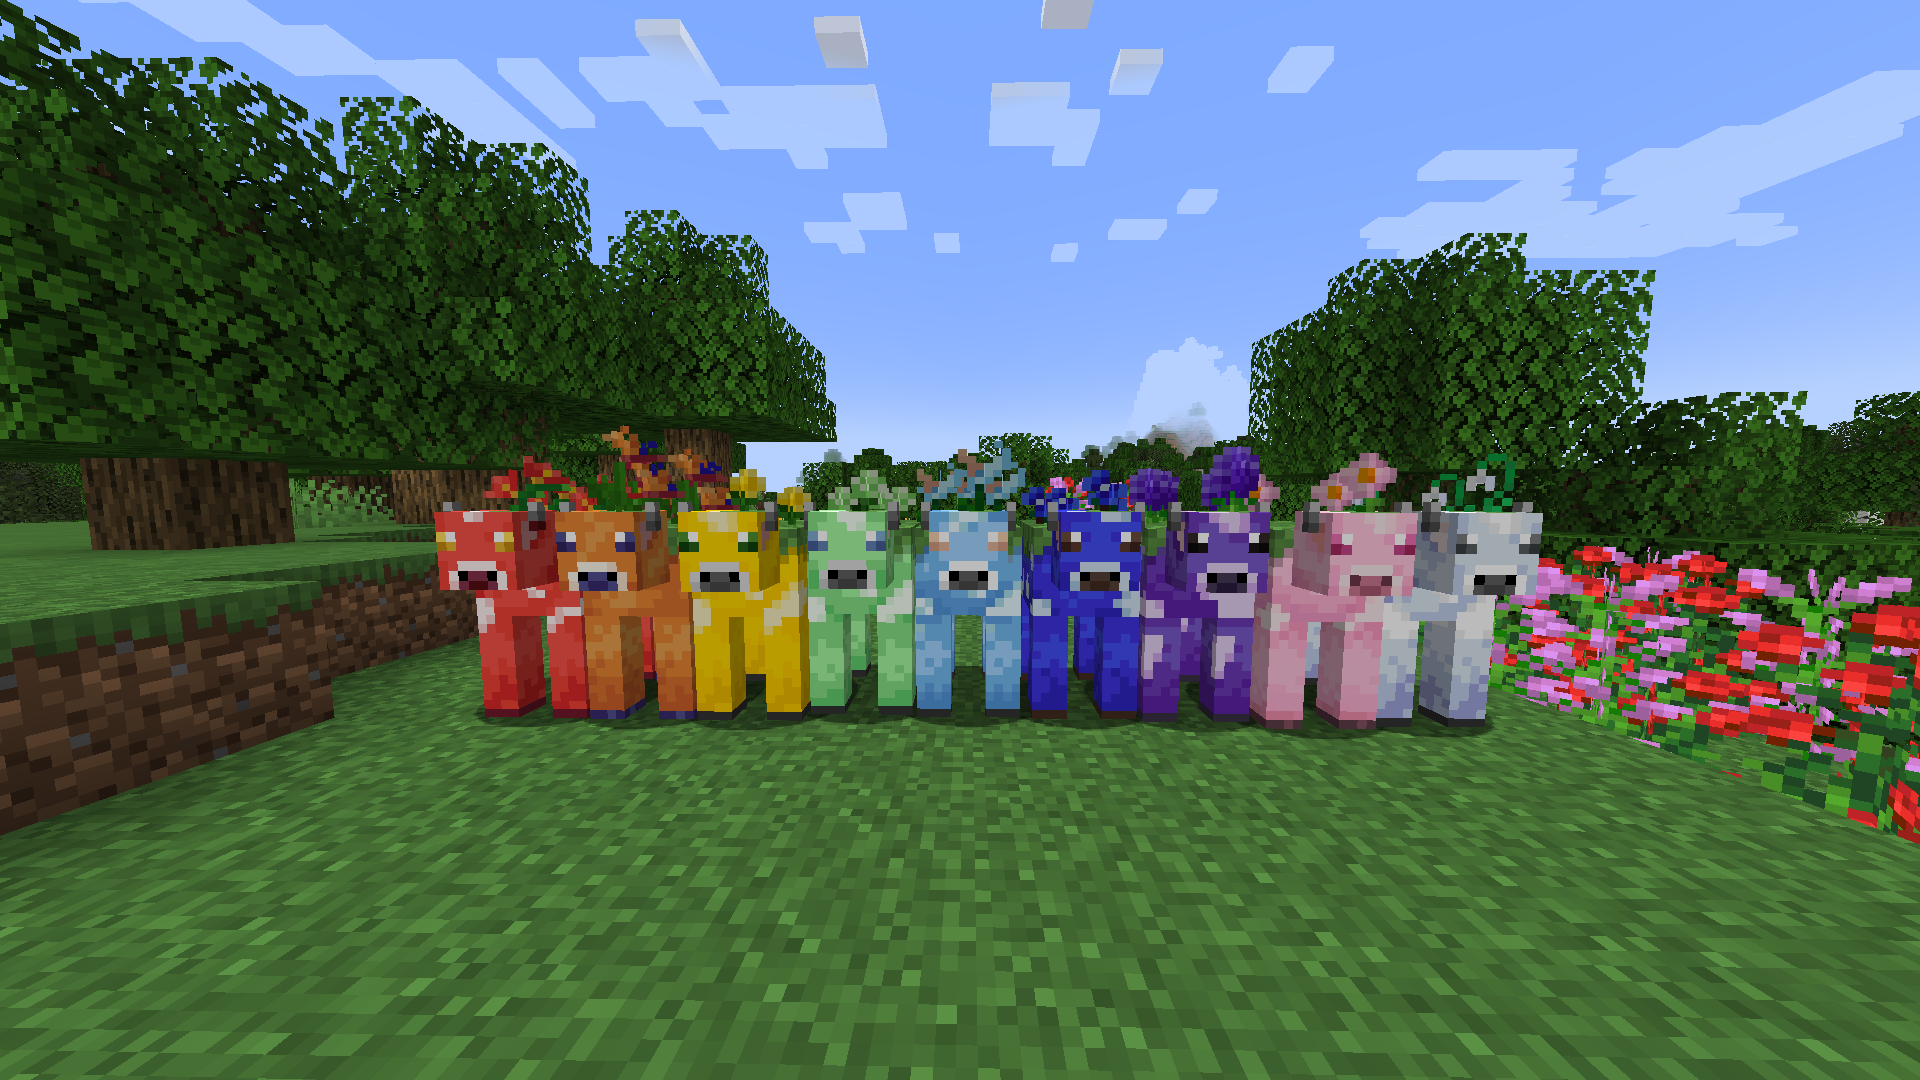 The nine Mooblooms features in the base mod. (From left to right; Freesia, Bird of Paradise, Buttercup, Limelight, Chargelily, Tropical Blue, Hyacinth, Pink Daisy, Snowdrop)